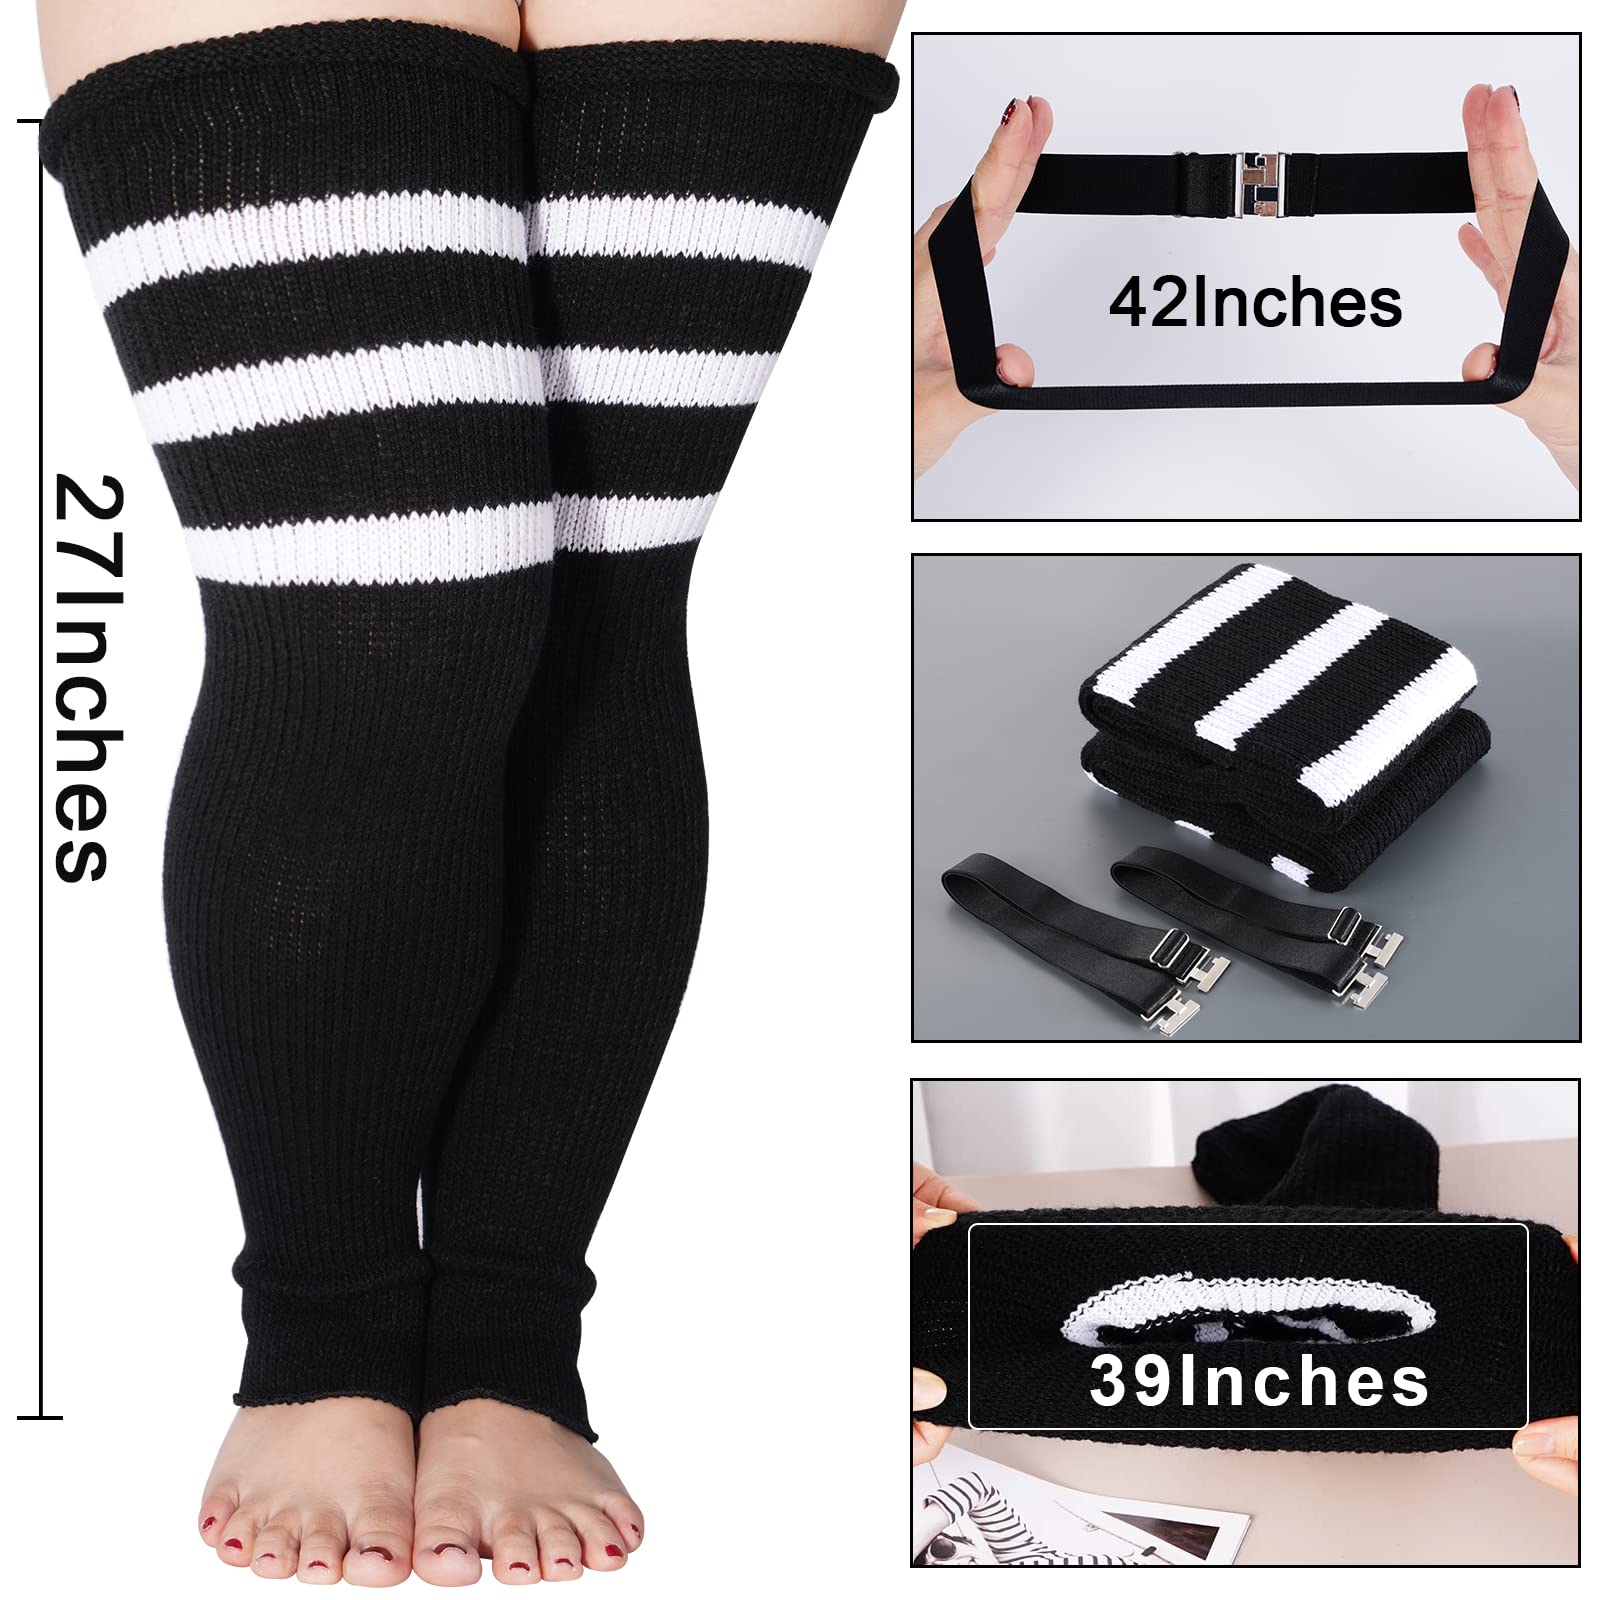 Wholesale leg warmers plus size In The Latest Fashionable Prints 